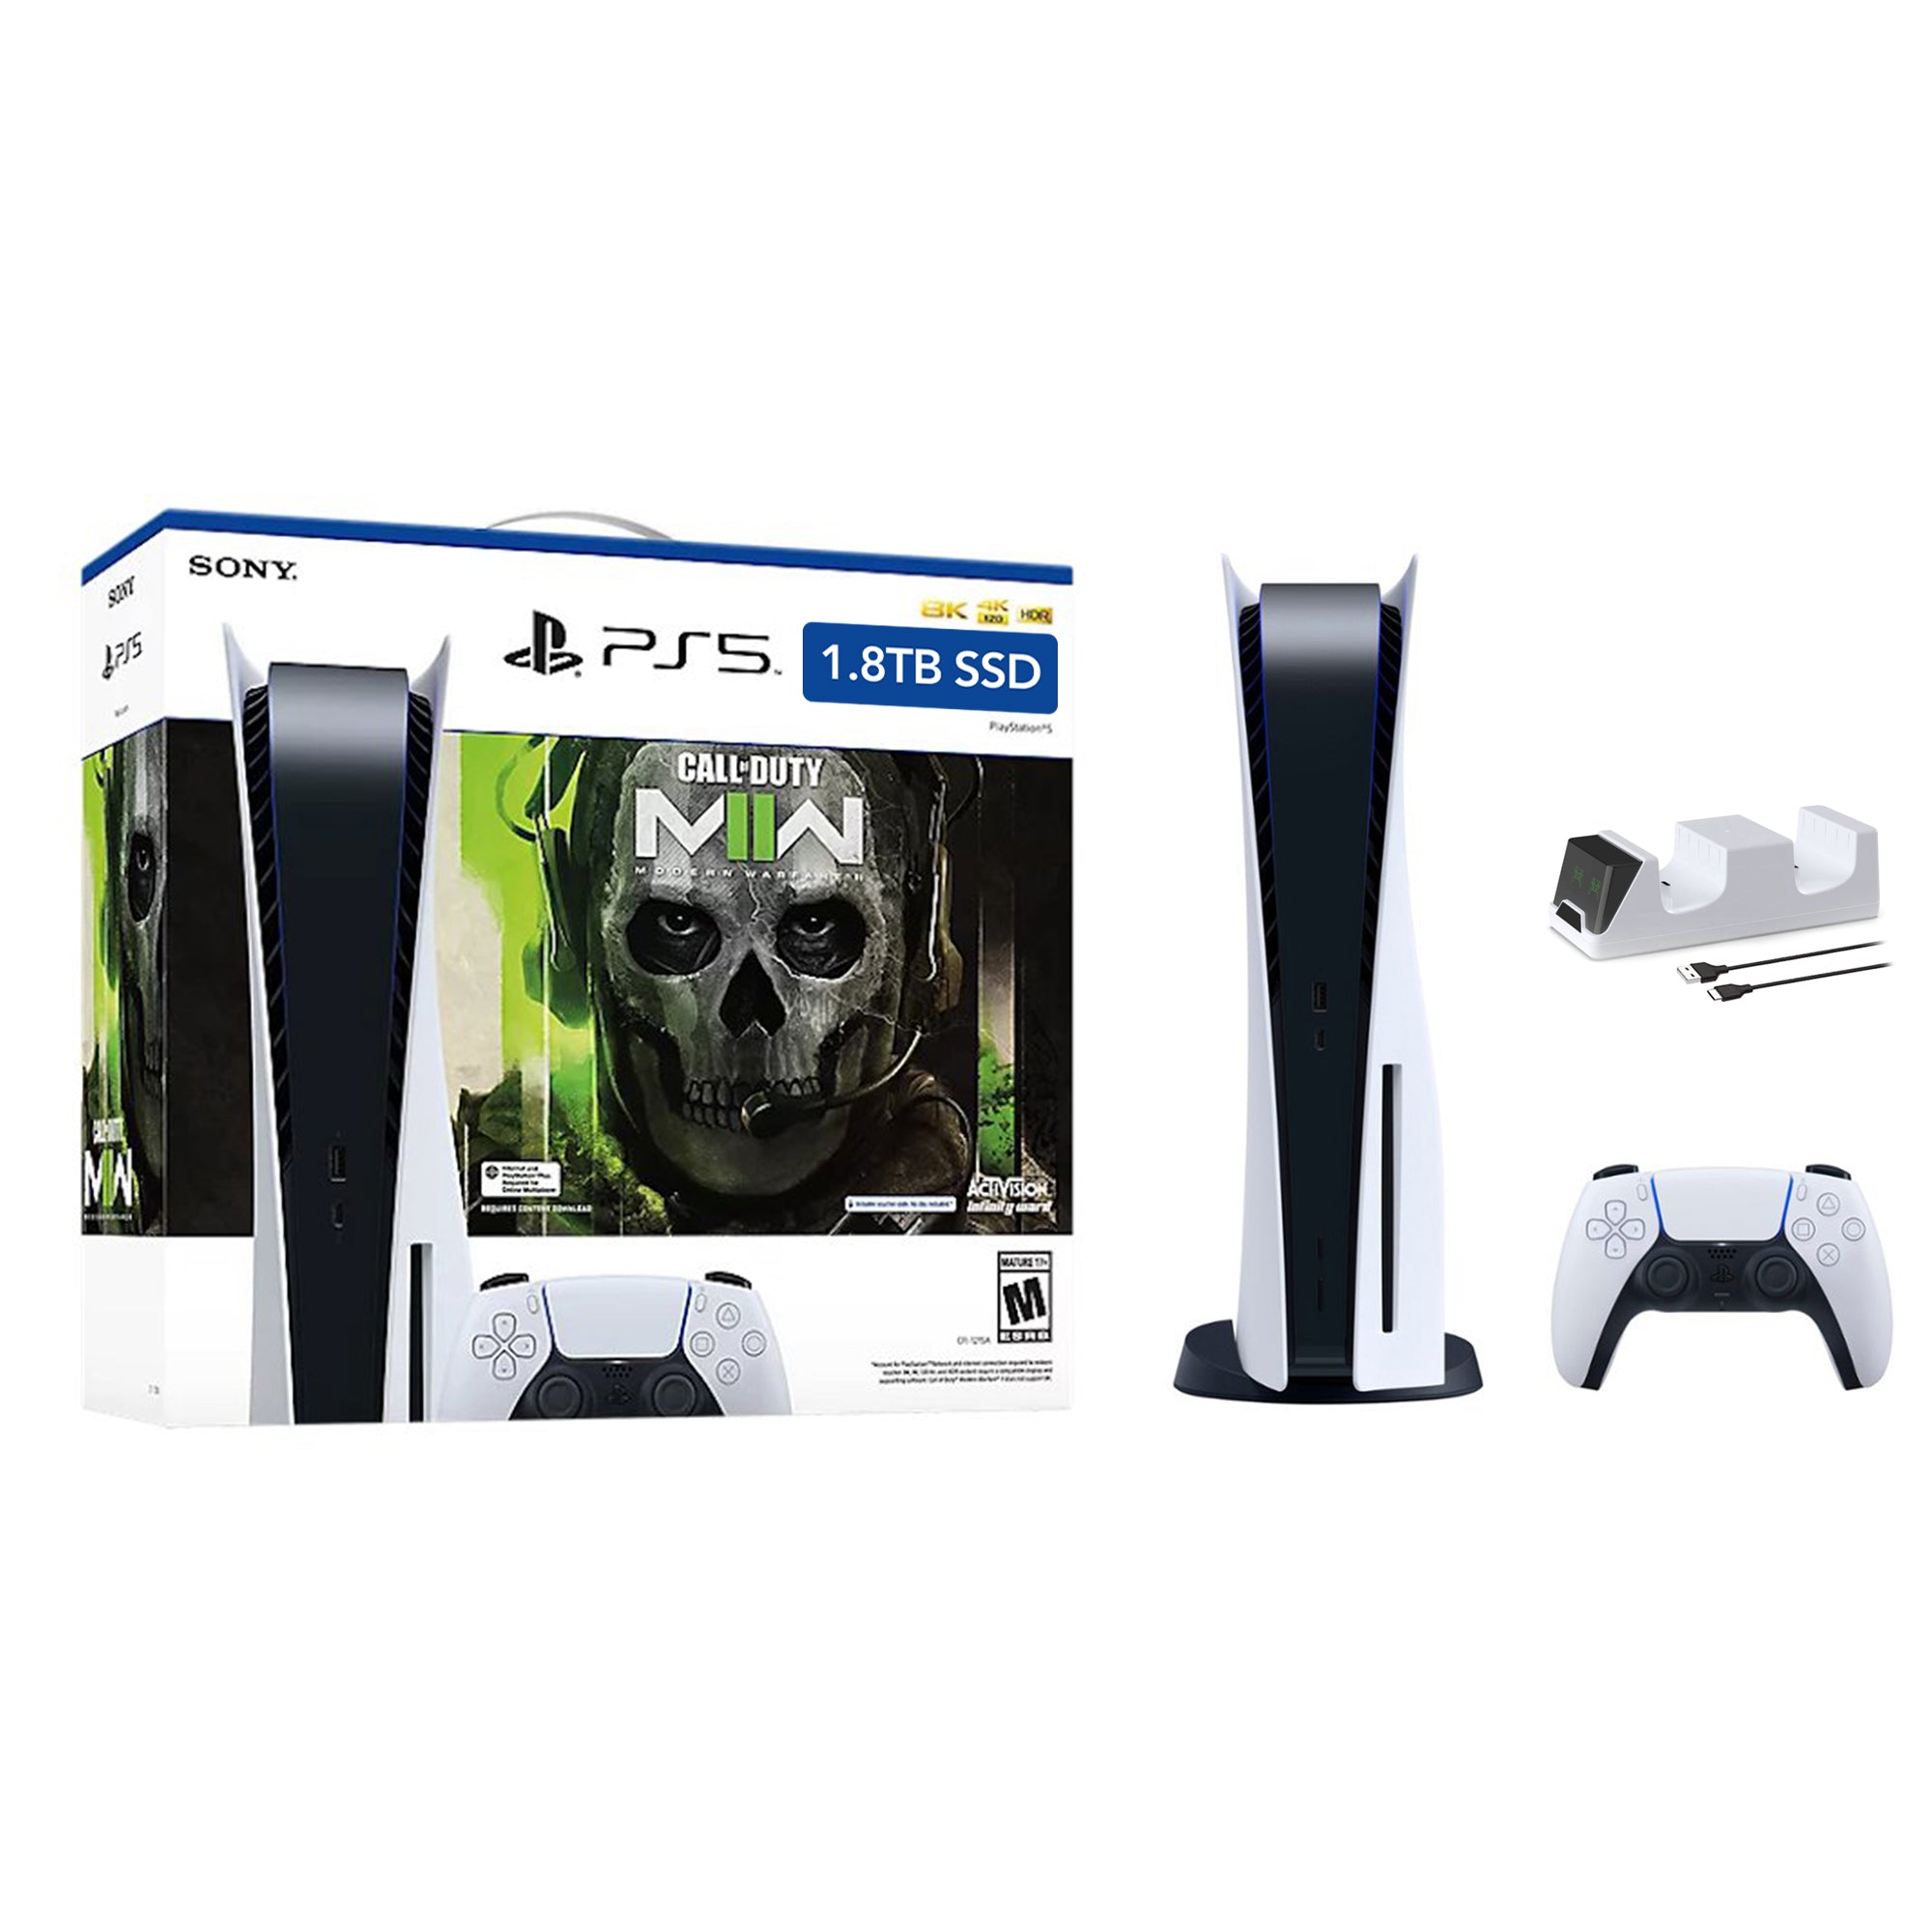 PlayStation 5 Upgraded 1.8TB Disc Edition Call of Duty Modern Warfare II Bundle and Mytrix Controller Charger - White, PS5 Gaming Console